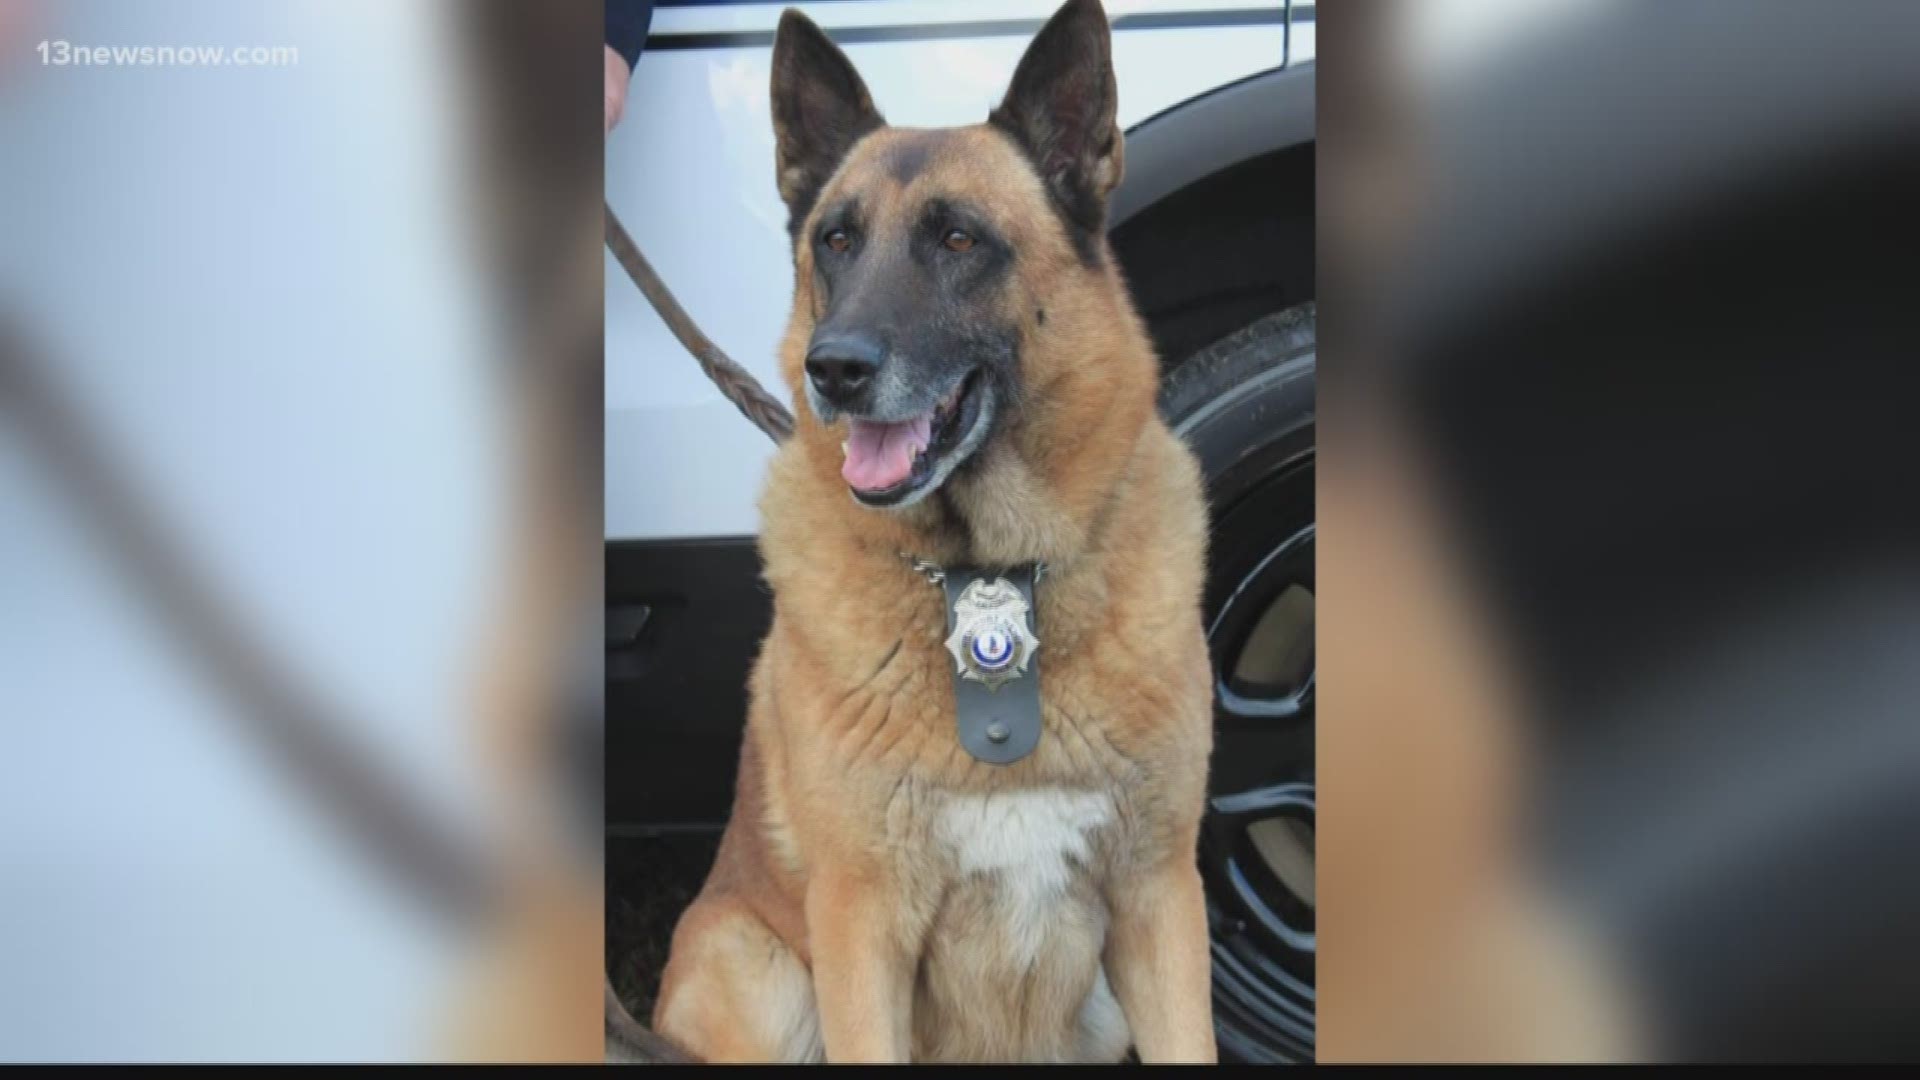 A former Newport News Police K-9 retired after serving for over 11 years.